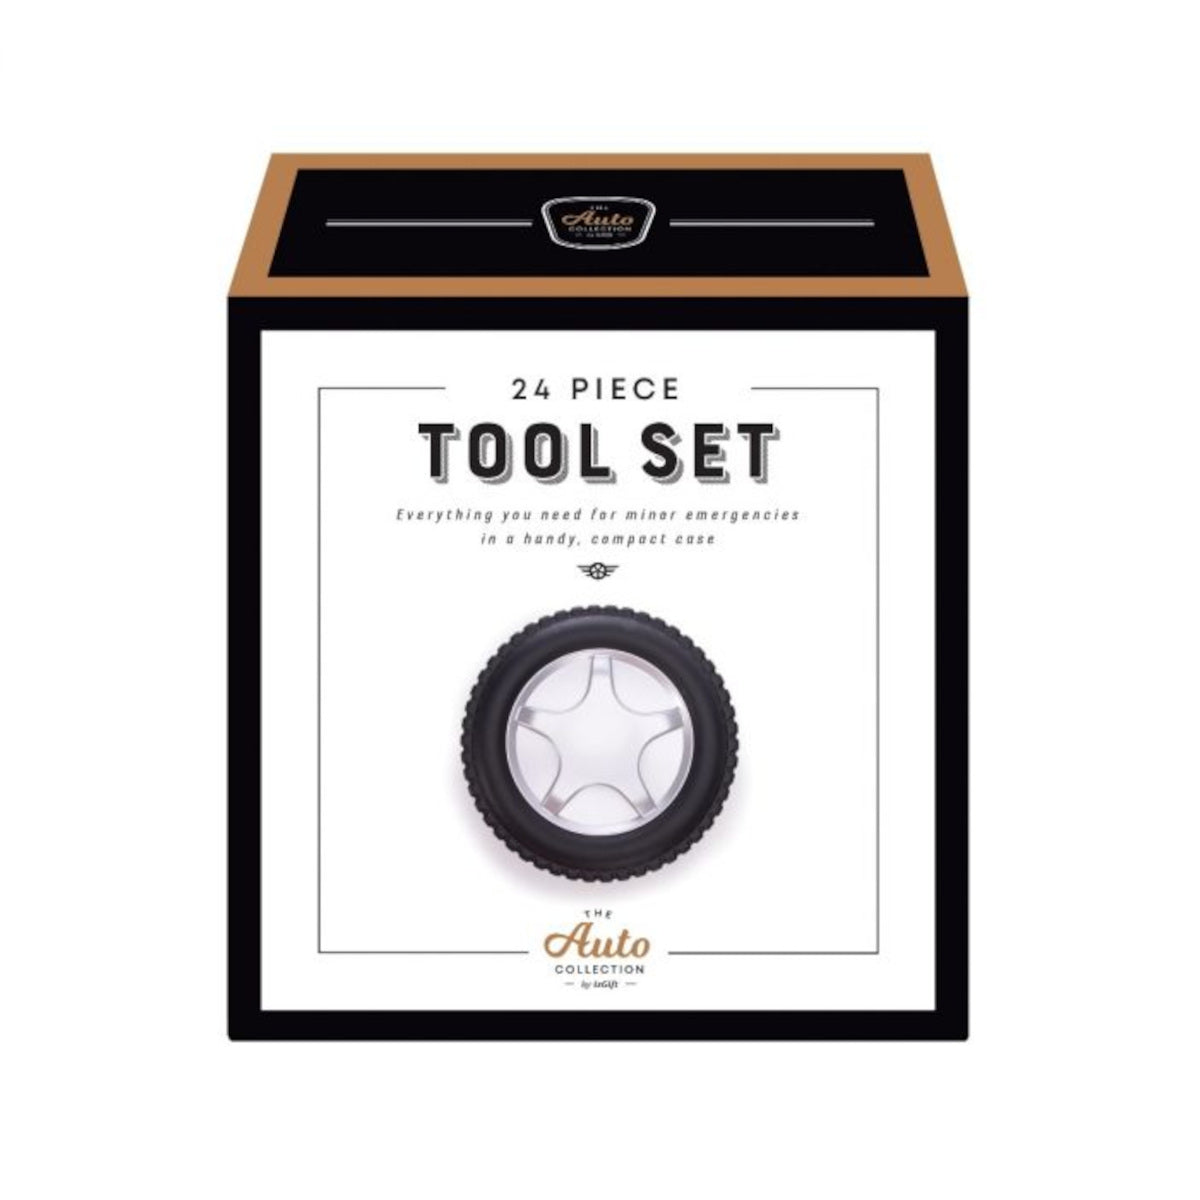 IS Gift 24 Piece Auto Collection Wheels Tool Set | Minimax